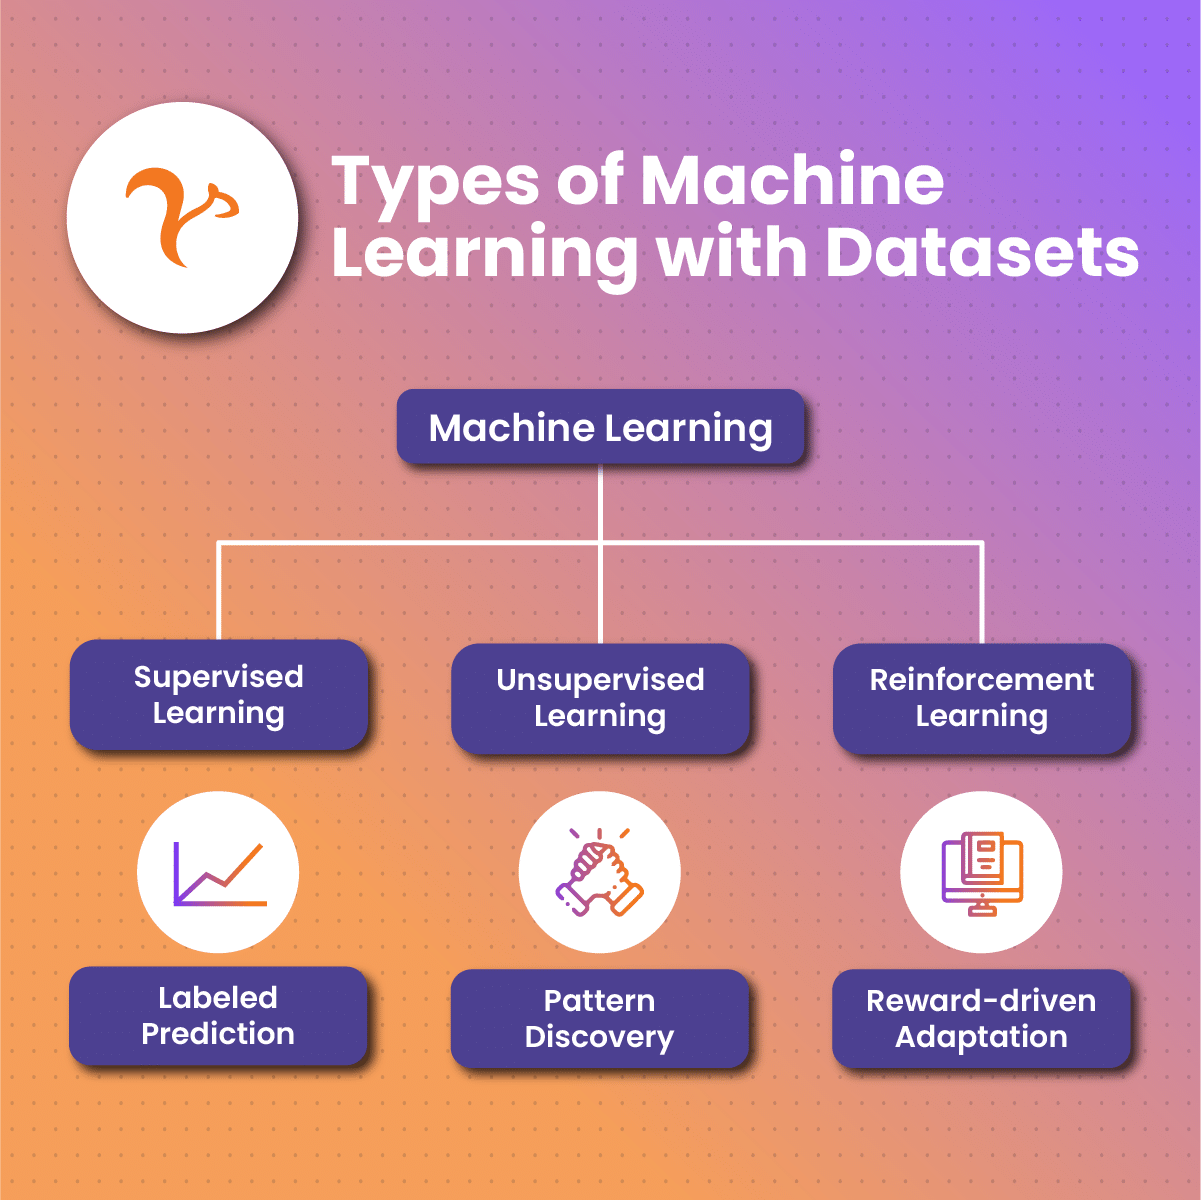 Types of Machine Learning with Datasets